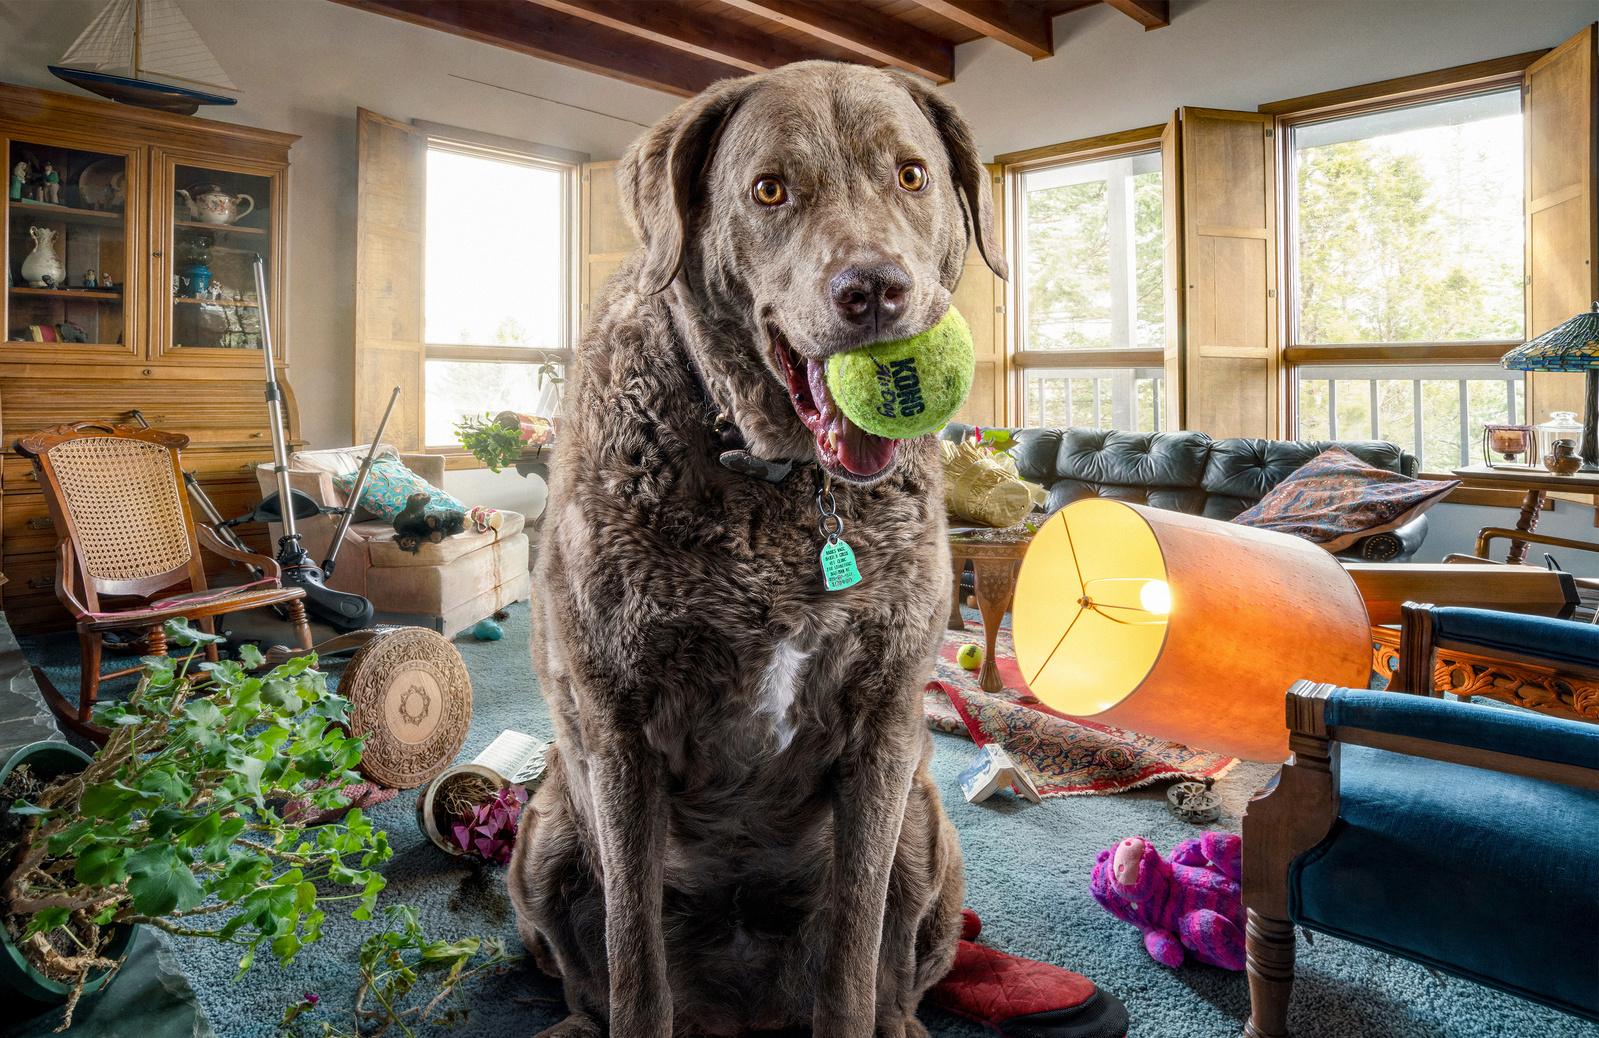 A composite portrait of a Chesapeake retriever holding a large Kong tennis ball while sitting in a living room with lots of knocked down furniture and other furnishings.